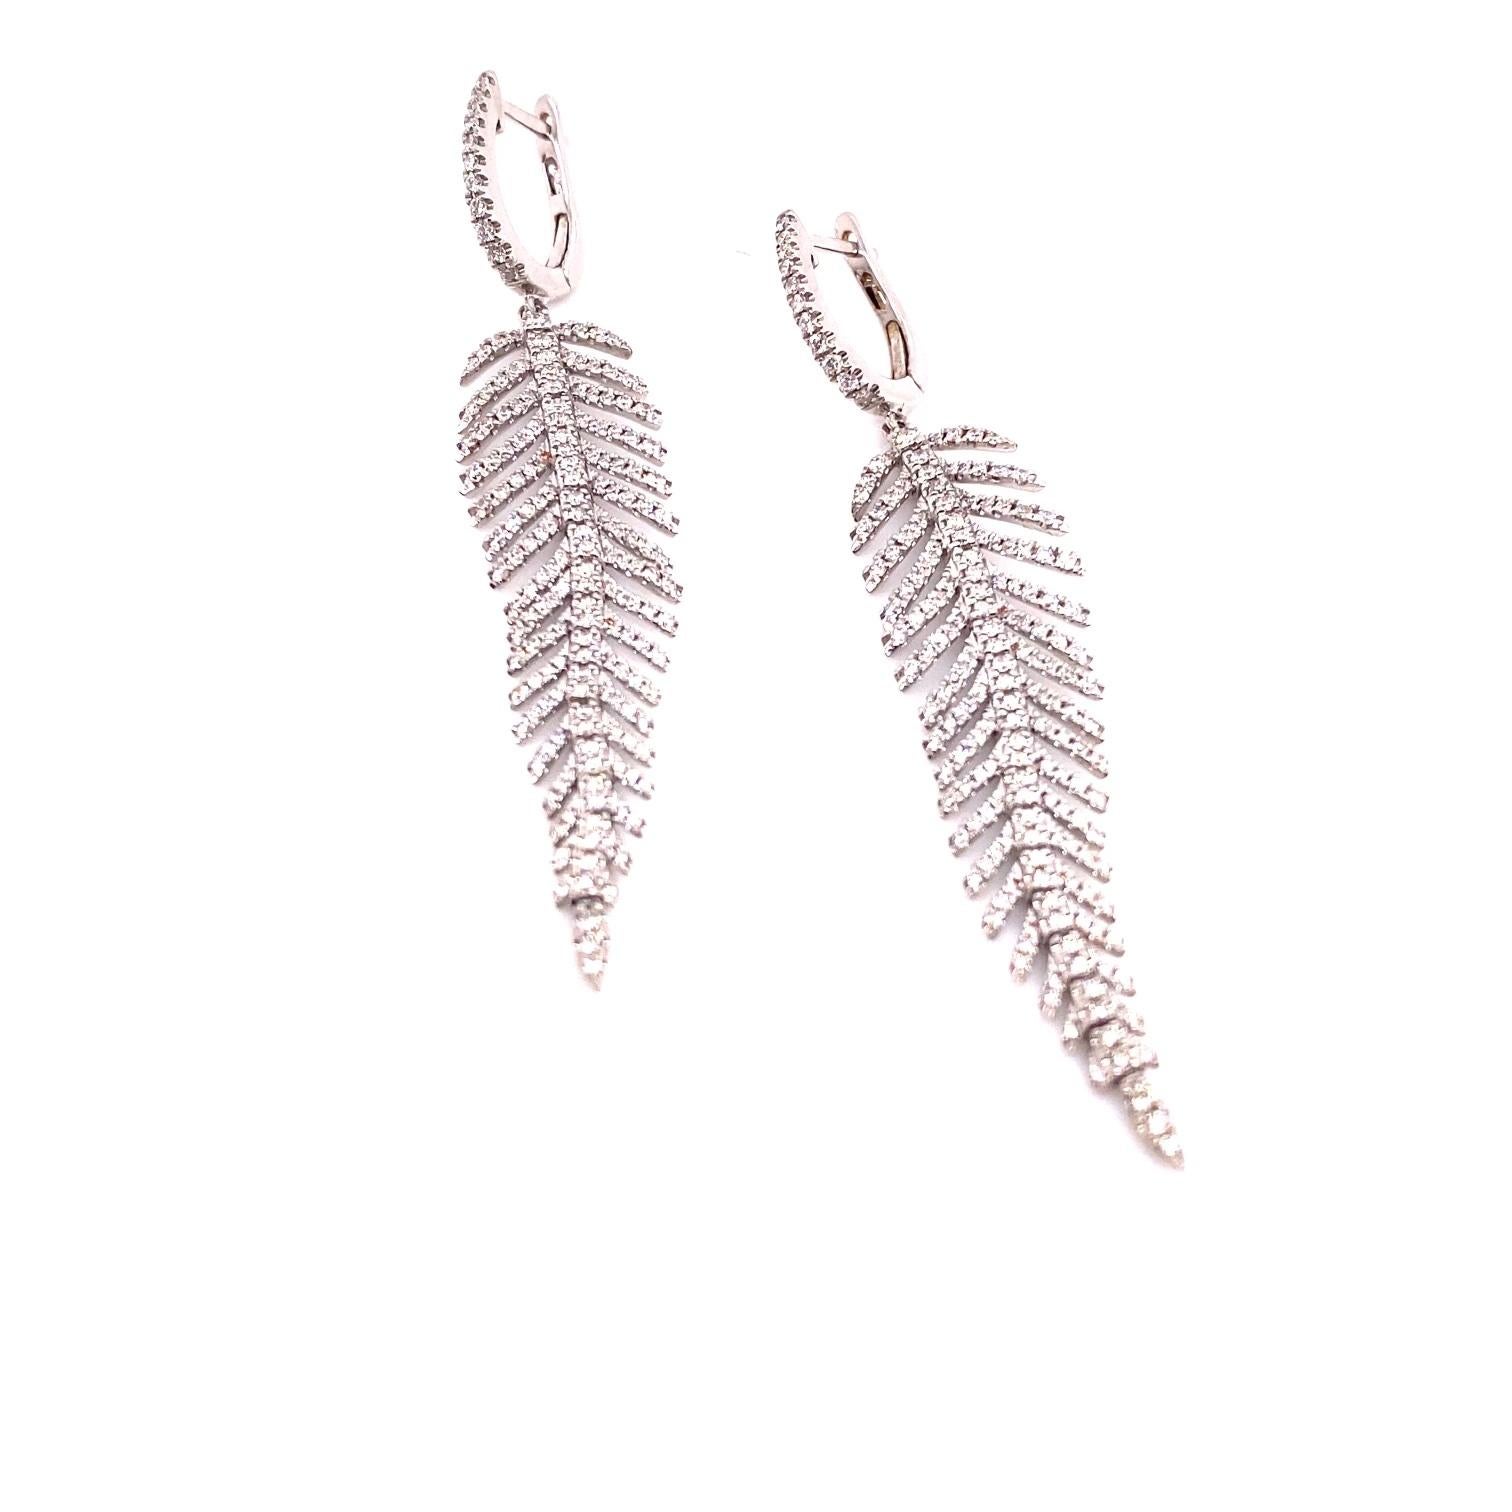 18k Gold Diamond Feather Earrings 

These exquisite earrings sparkle with diamonds, and is constructed meticulously to create a smooth movement in its design. High quality earrings crafted in 11.75 grams in 18k white gold, and has over 360 round